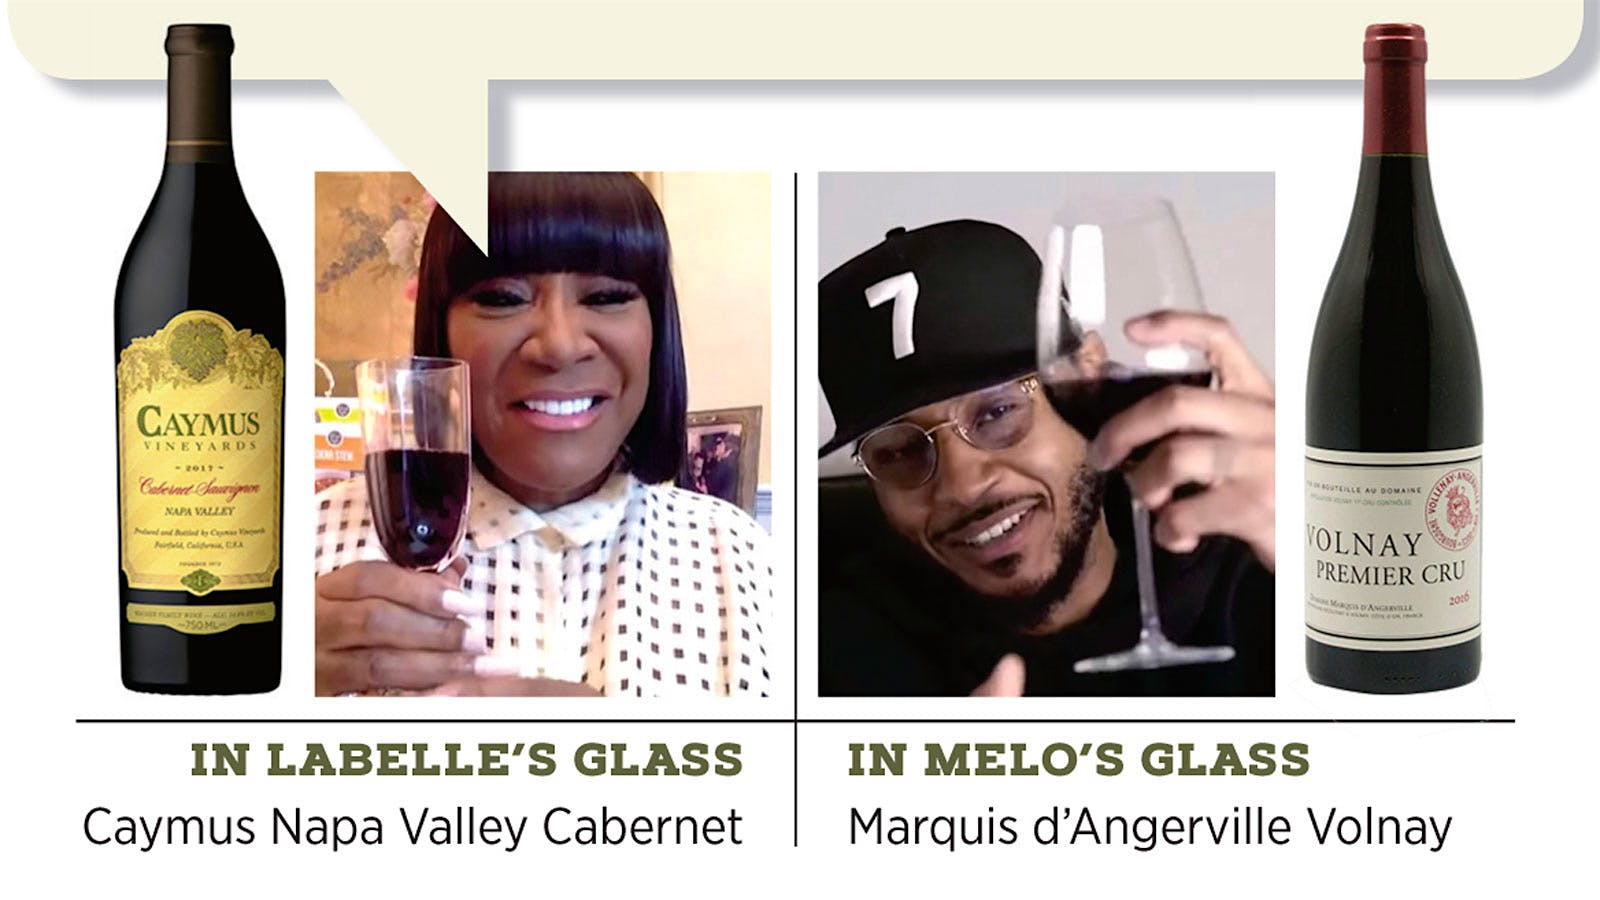 The Melo Wine Series: What’s in Your Glass?